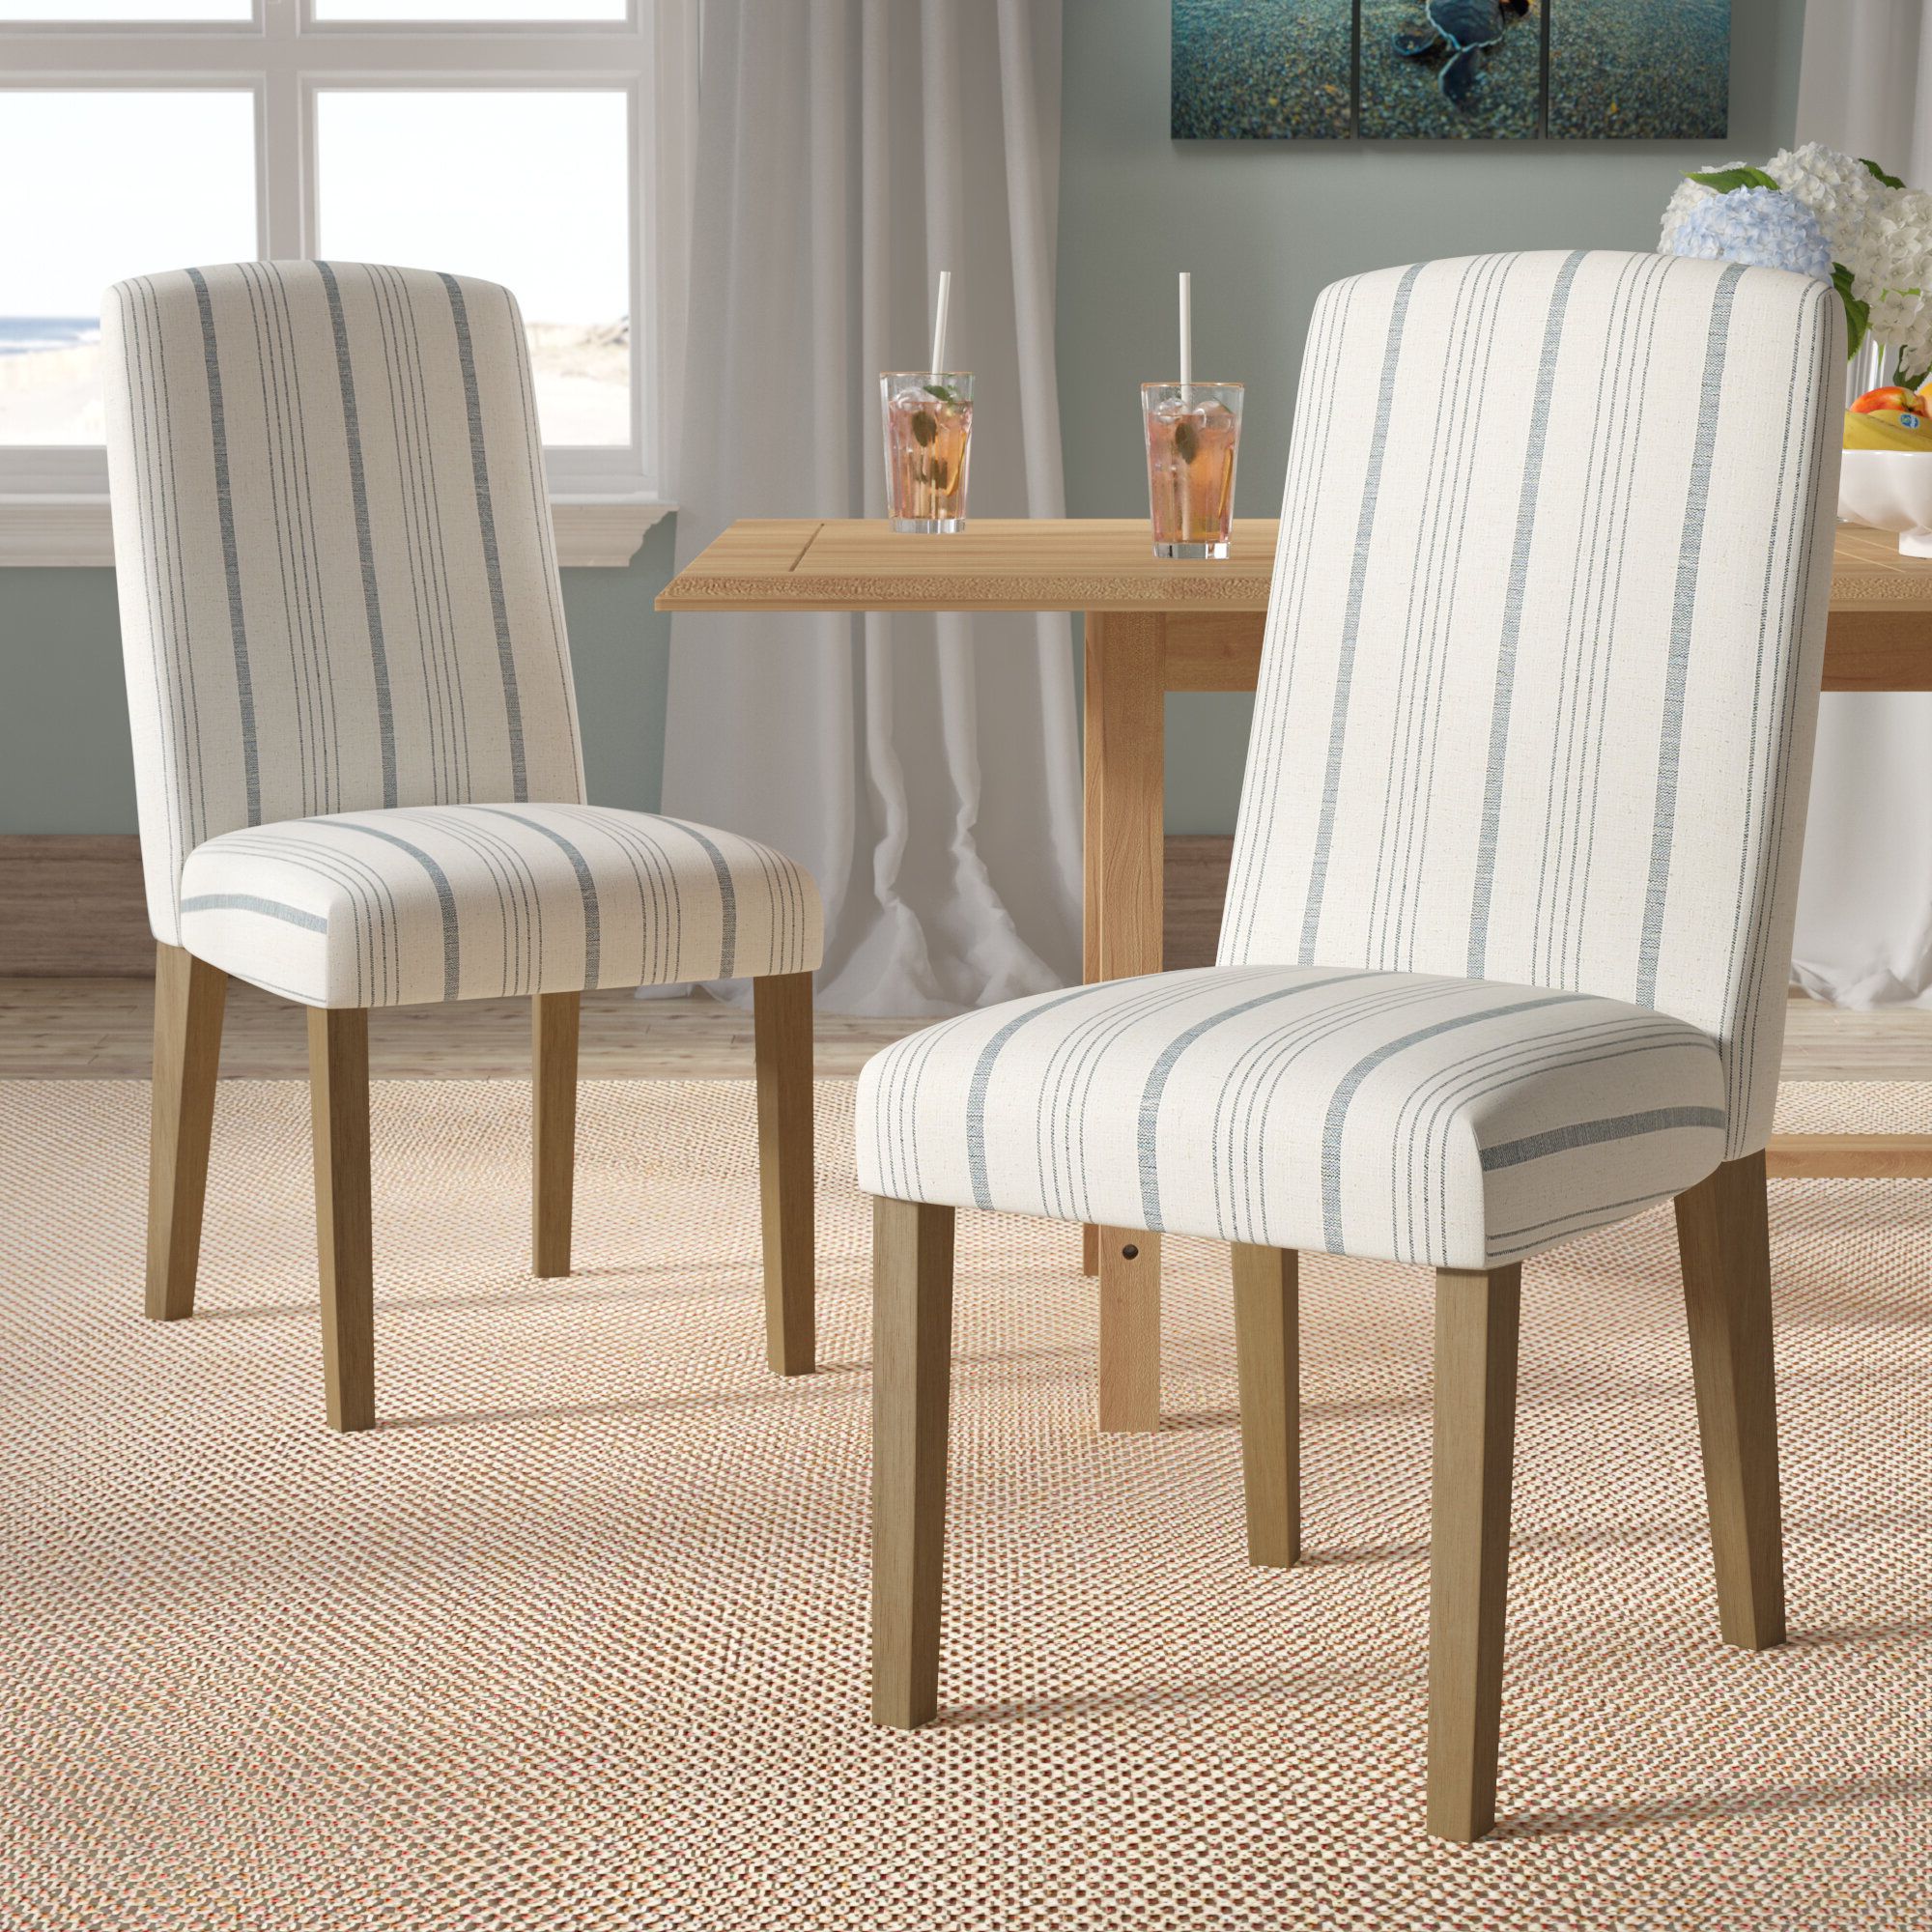 2020 Bob Stripe Upholstered Dining Chairs (set Of 2) With Regard To Bob Stripe Upholstered Dining Chair (View 1 of 20)